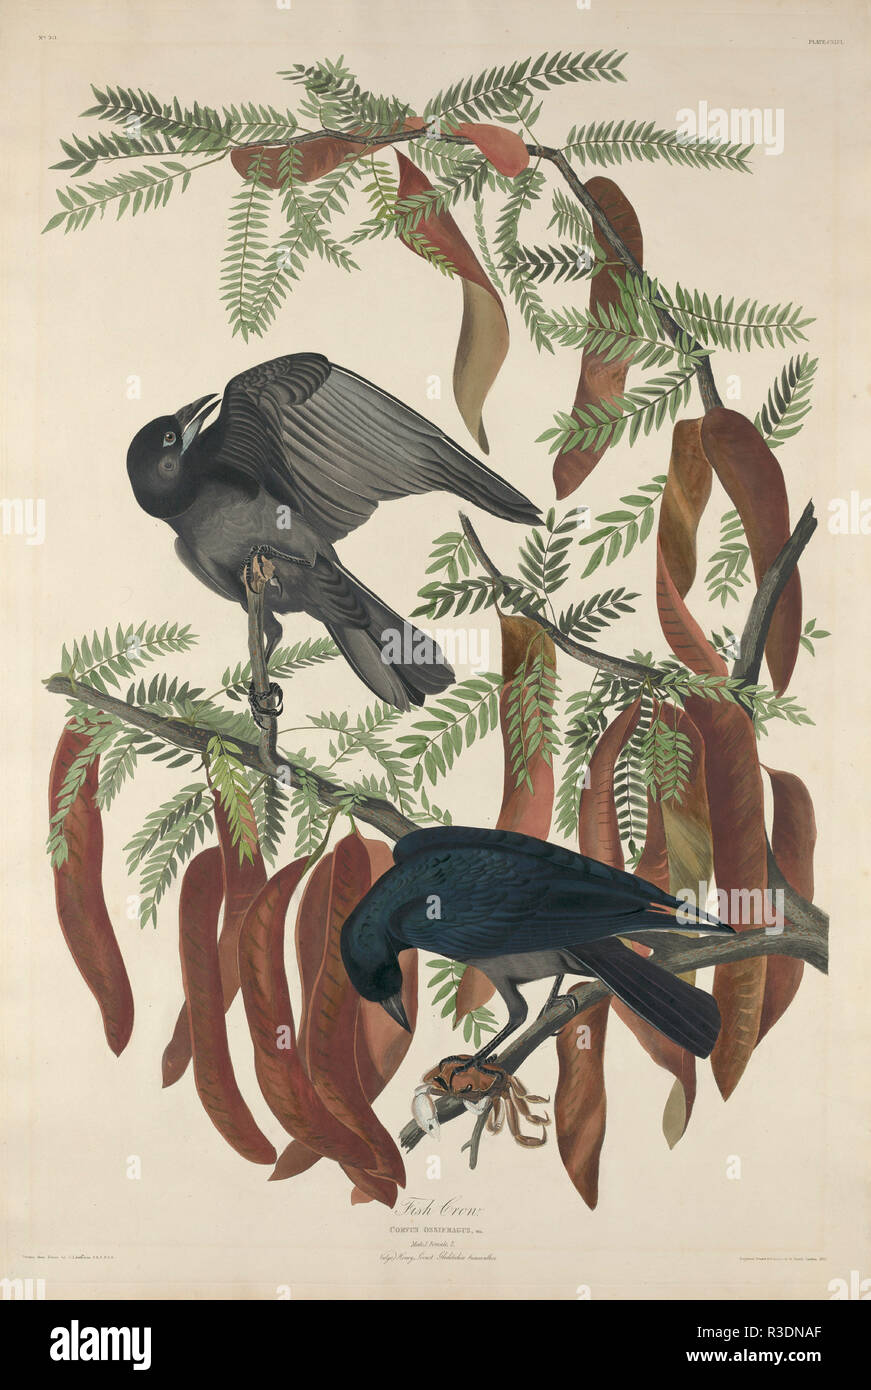 Fish Crow. Dated: 1832. Medium: hand-colored etching and aquatint on Whatman paper. Museum: National Gallery of Art, Washington DC. Author: Robert Havell after John James Audubon. Stock Photo